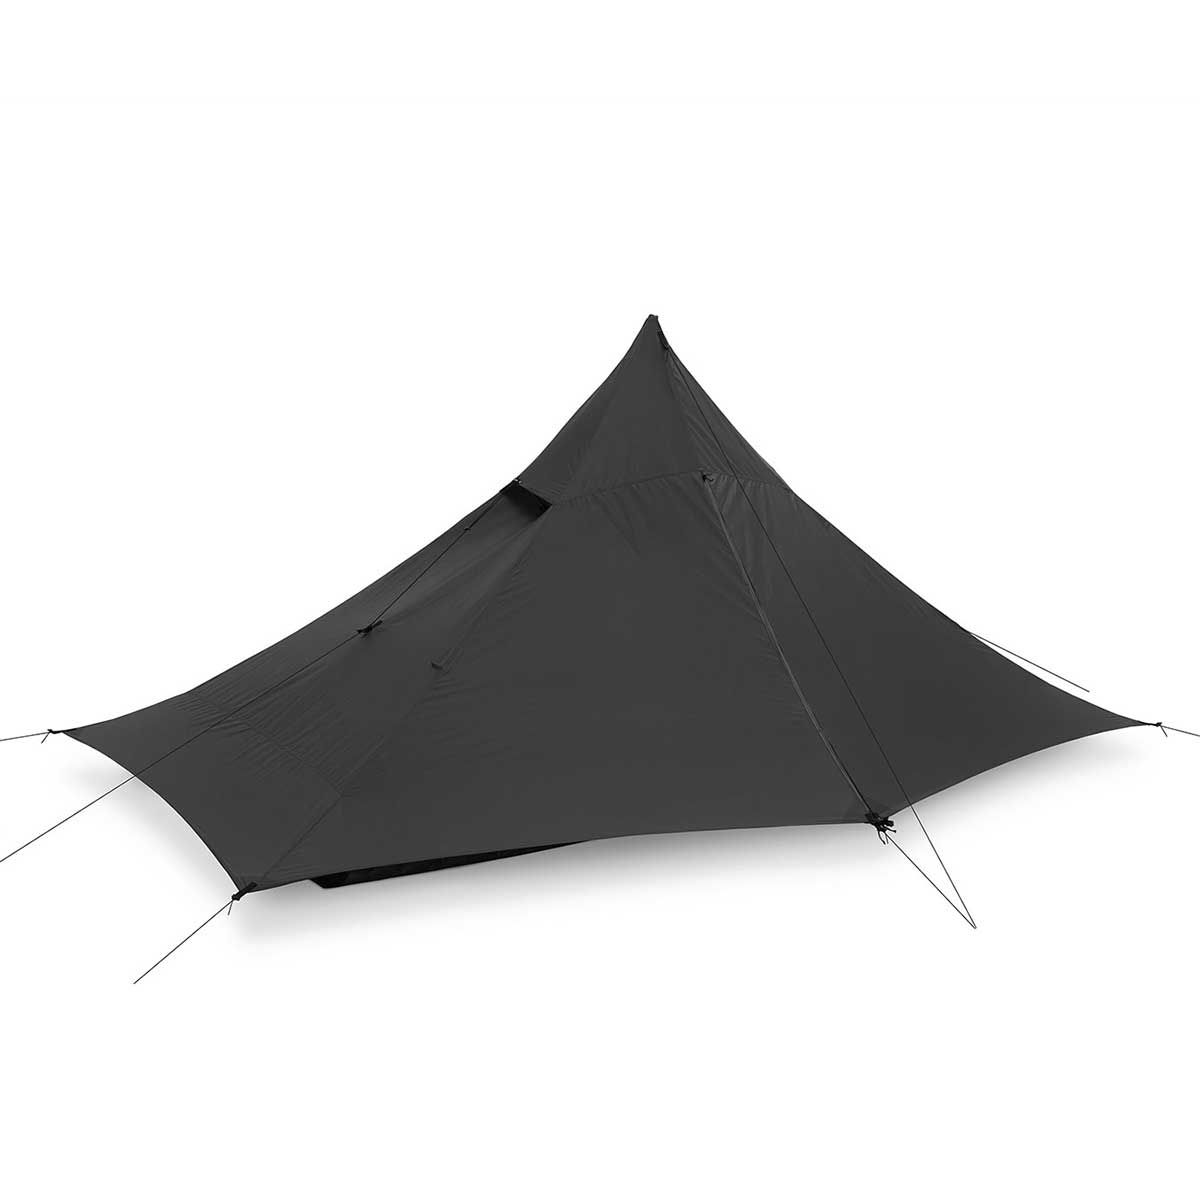 Liteway Illusion Solo backpacking tent - 1 person